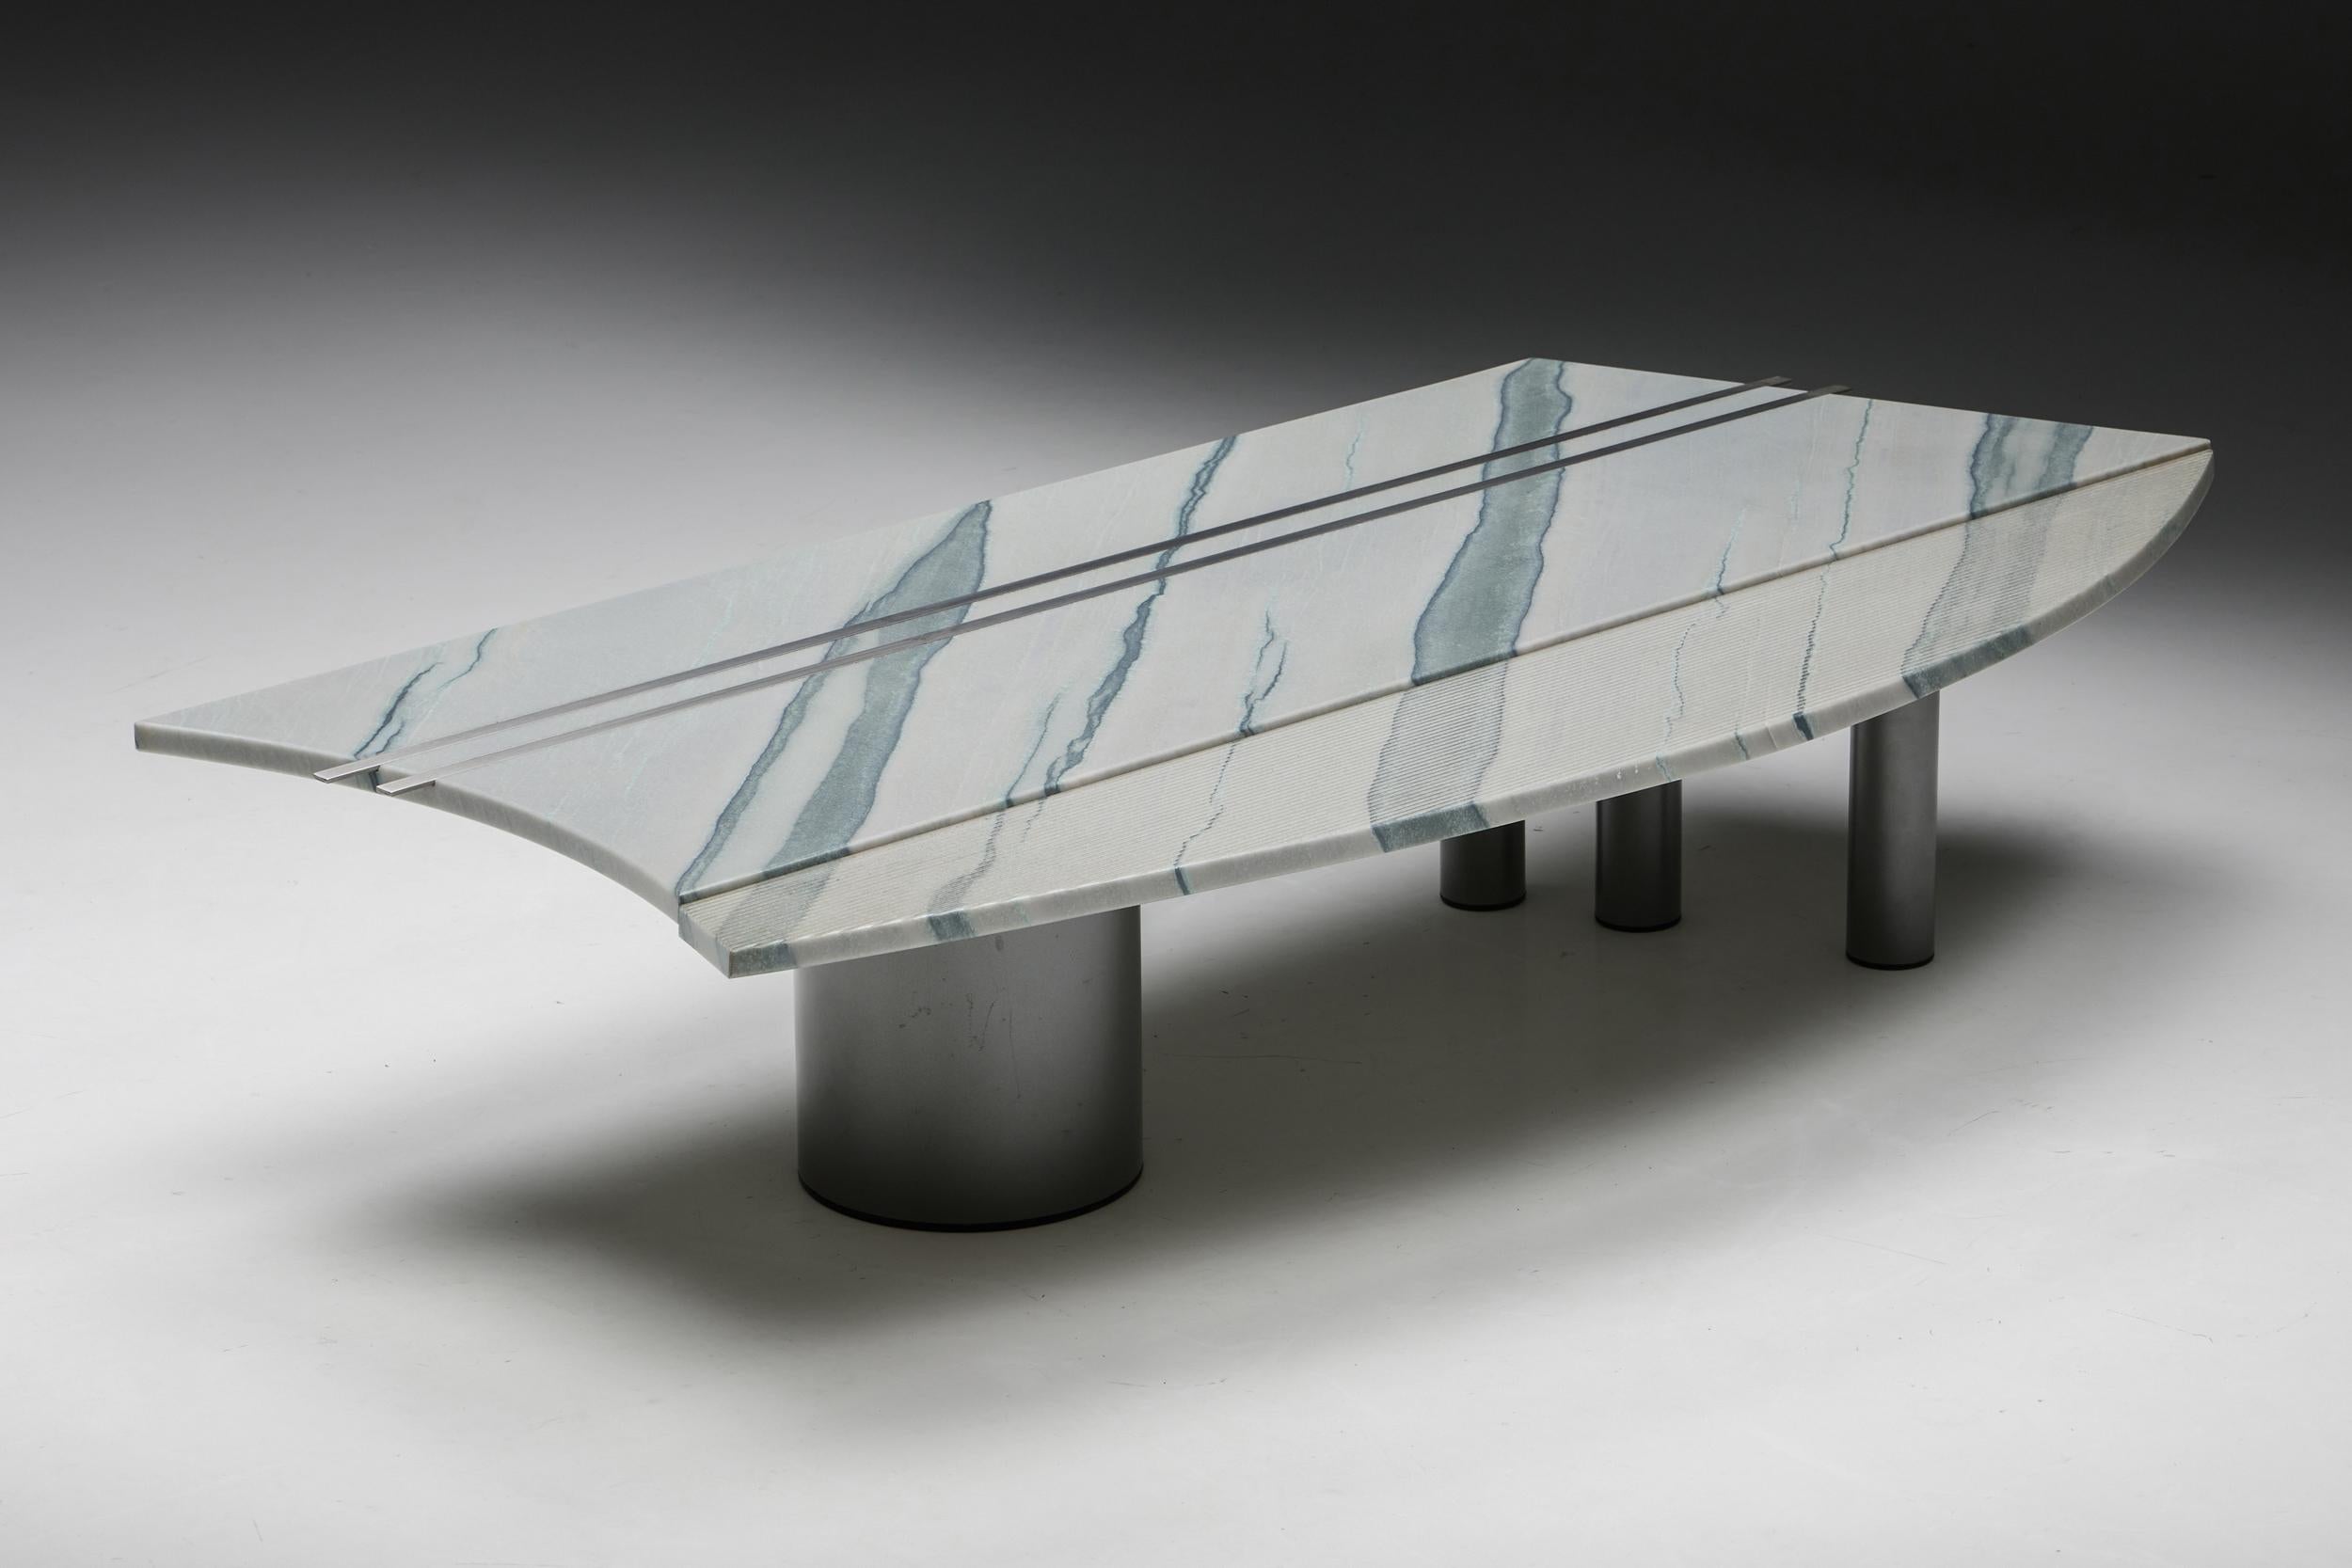 Pia Manu; marble; steel; coffee table; cocktail table; 1990s; Belgium; Belgian Design; Side Table; Post-Modern;

Belgian post-modern marble sculptural coffee table created by Pia Manu in the 1990s. A sculptural design featuring four cylindrical